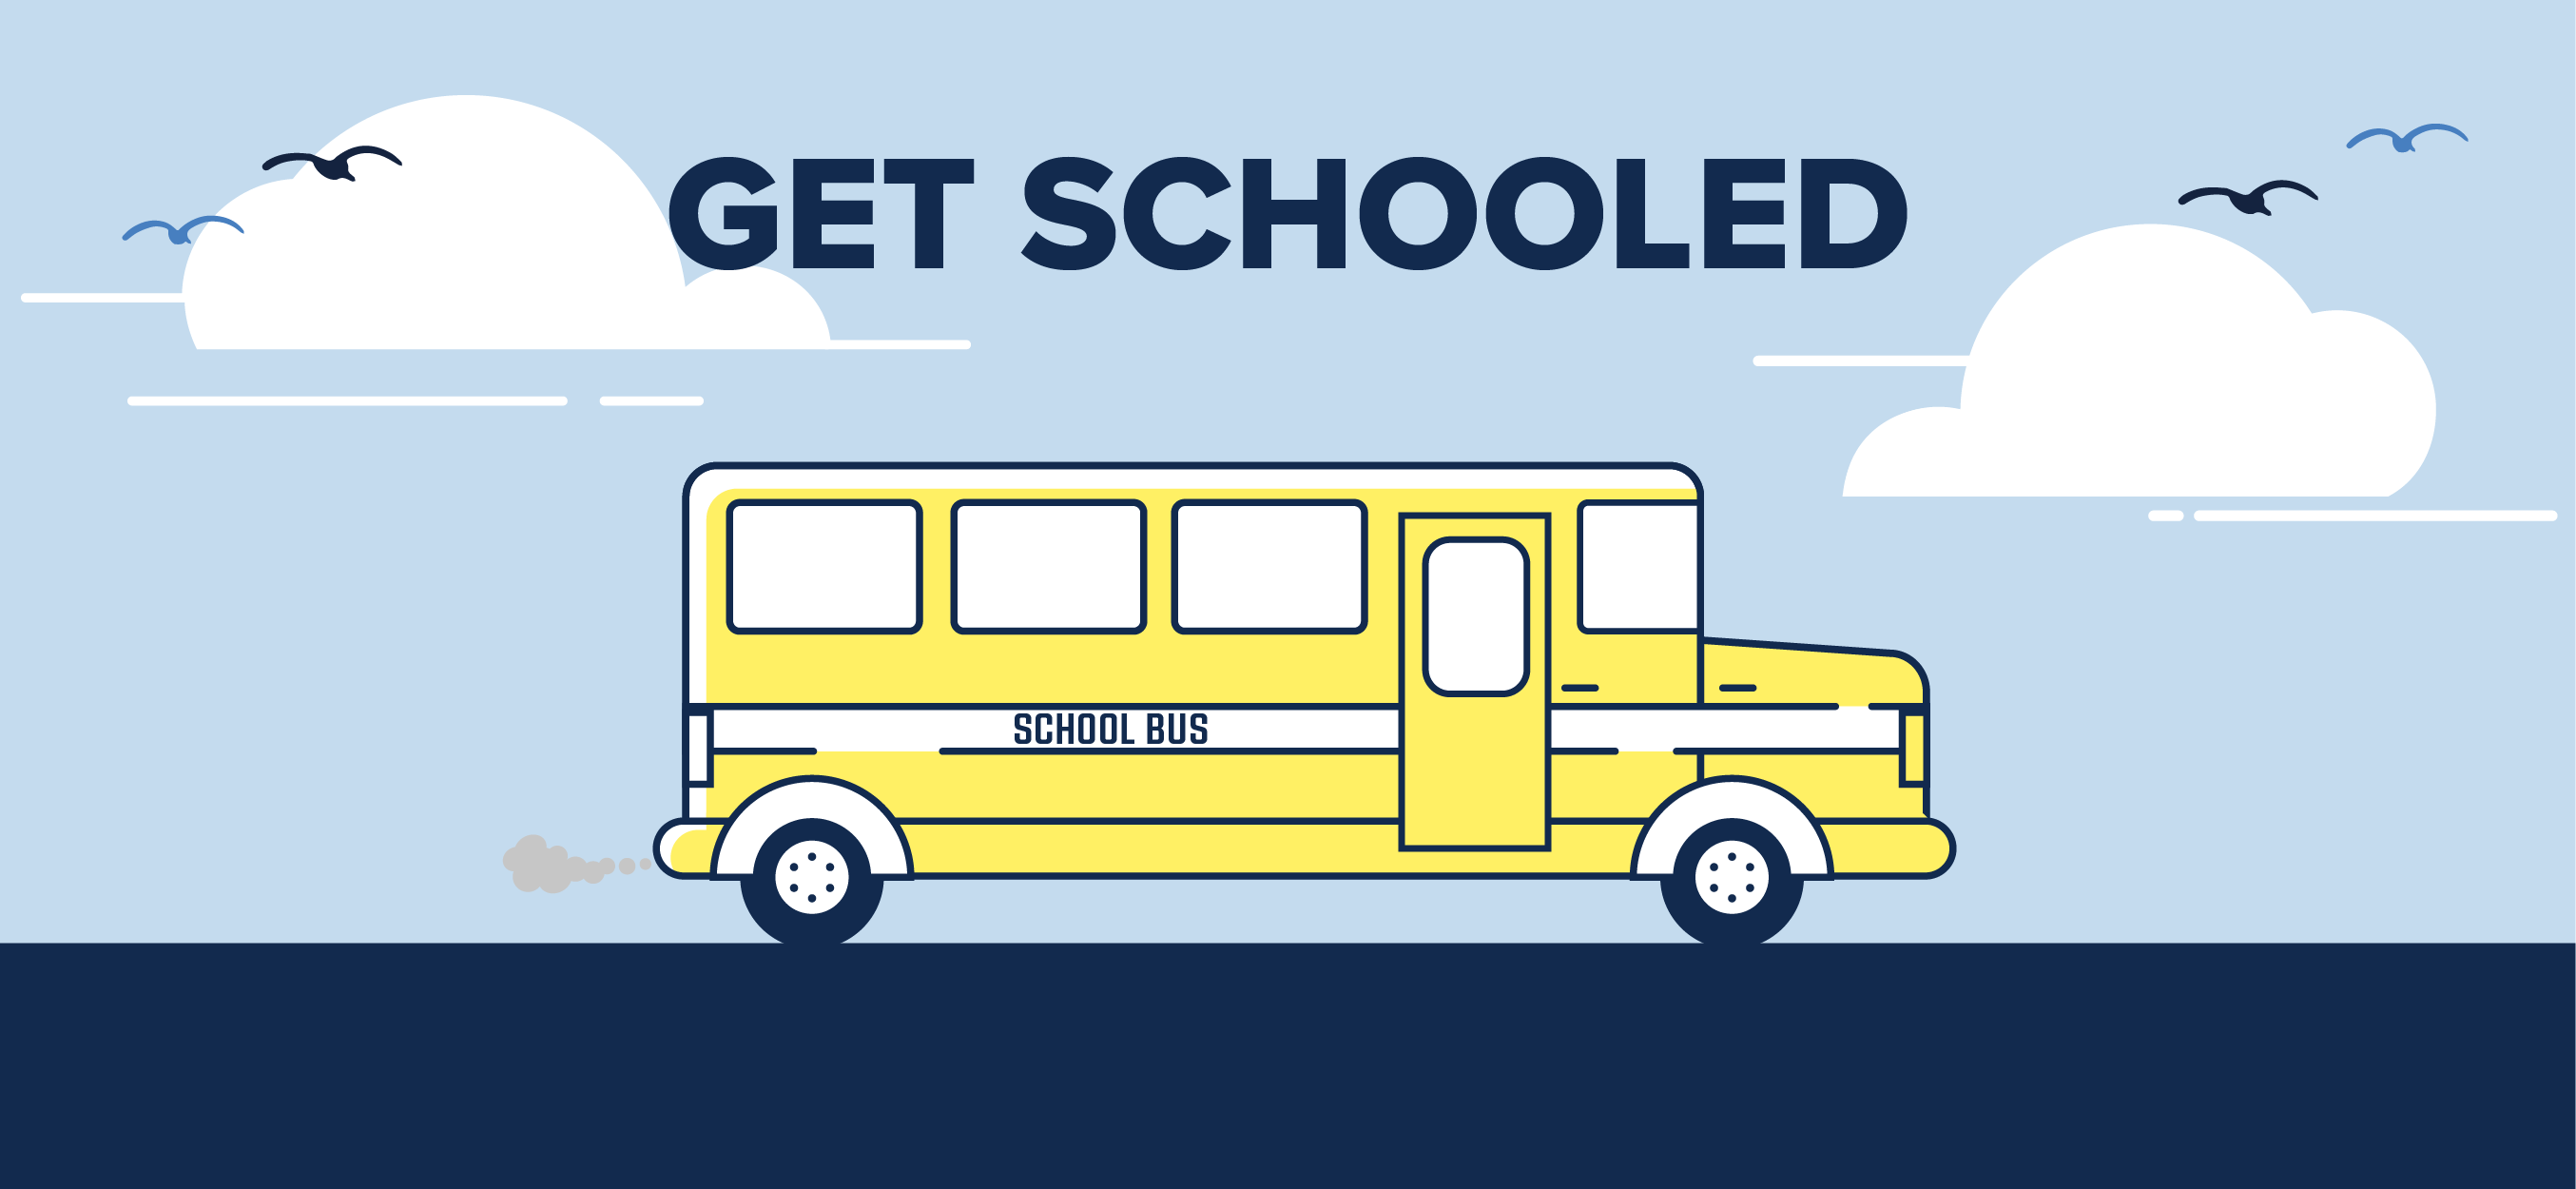 Get to School Safely - A How-To Guide for Parents  - bus